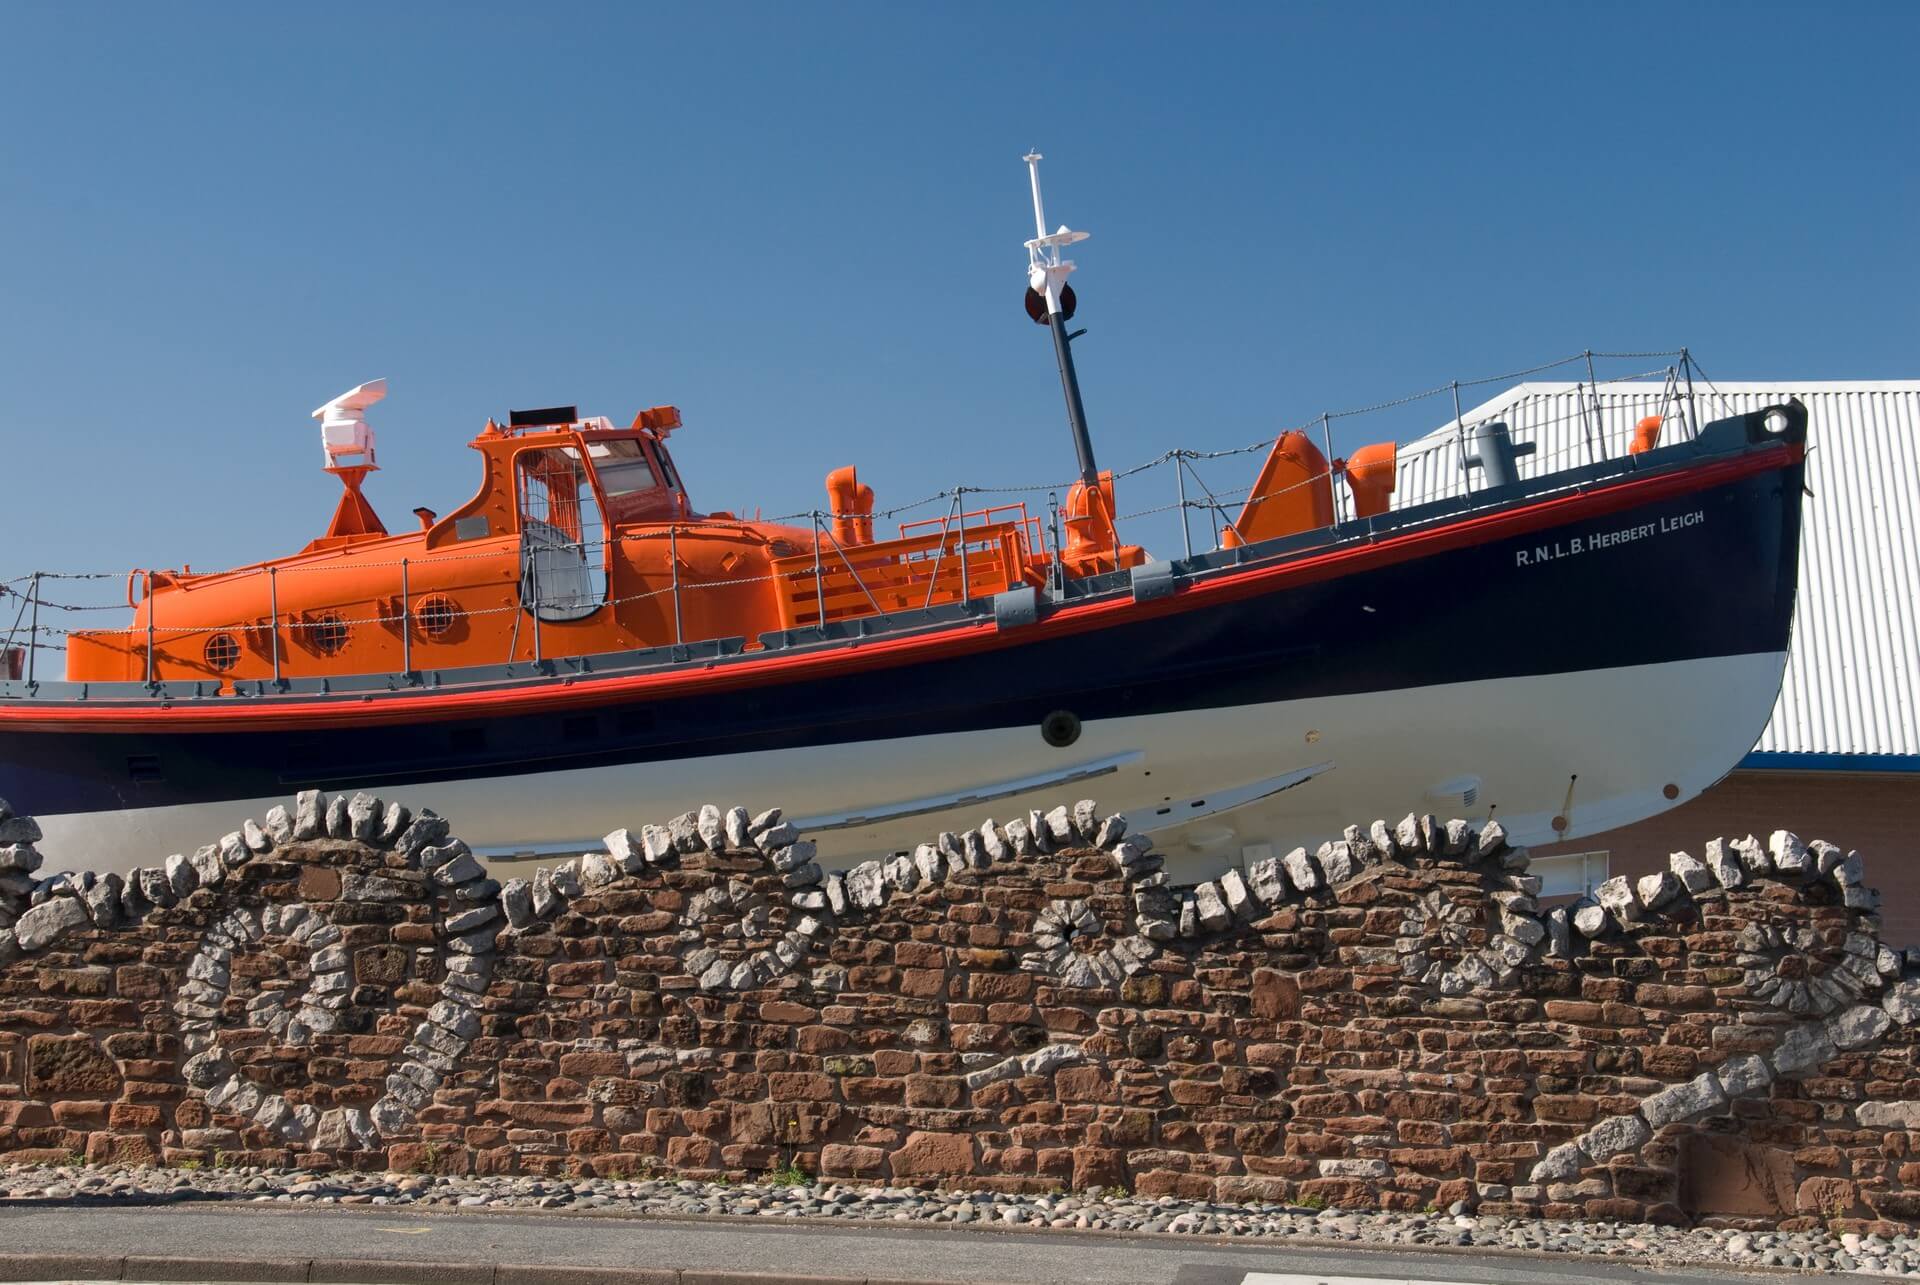 Lifeboat, Dock Museum, Barrow in Furness
